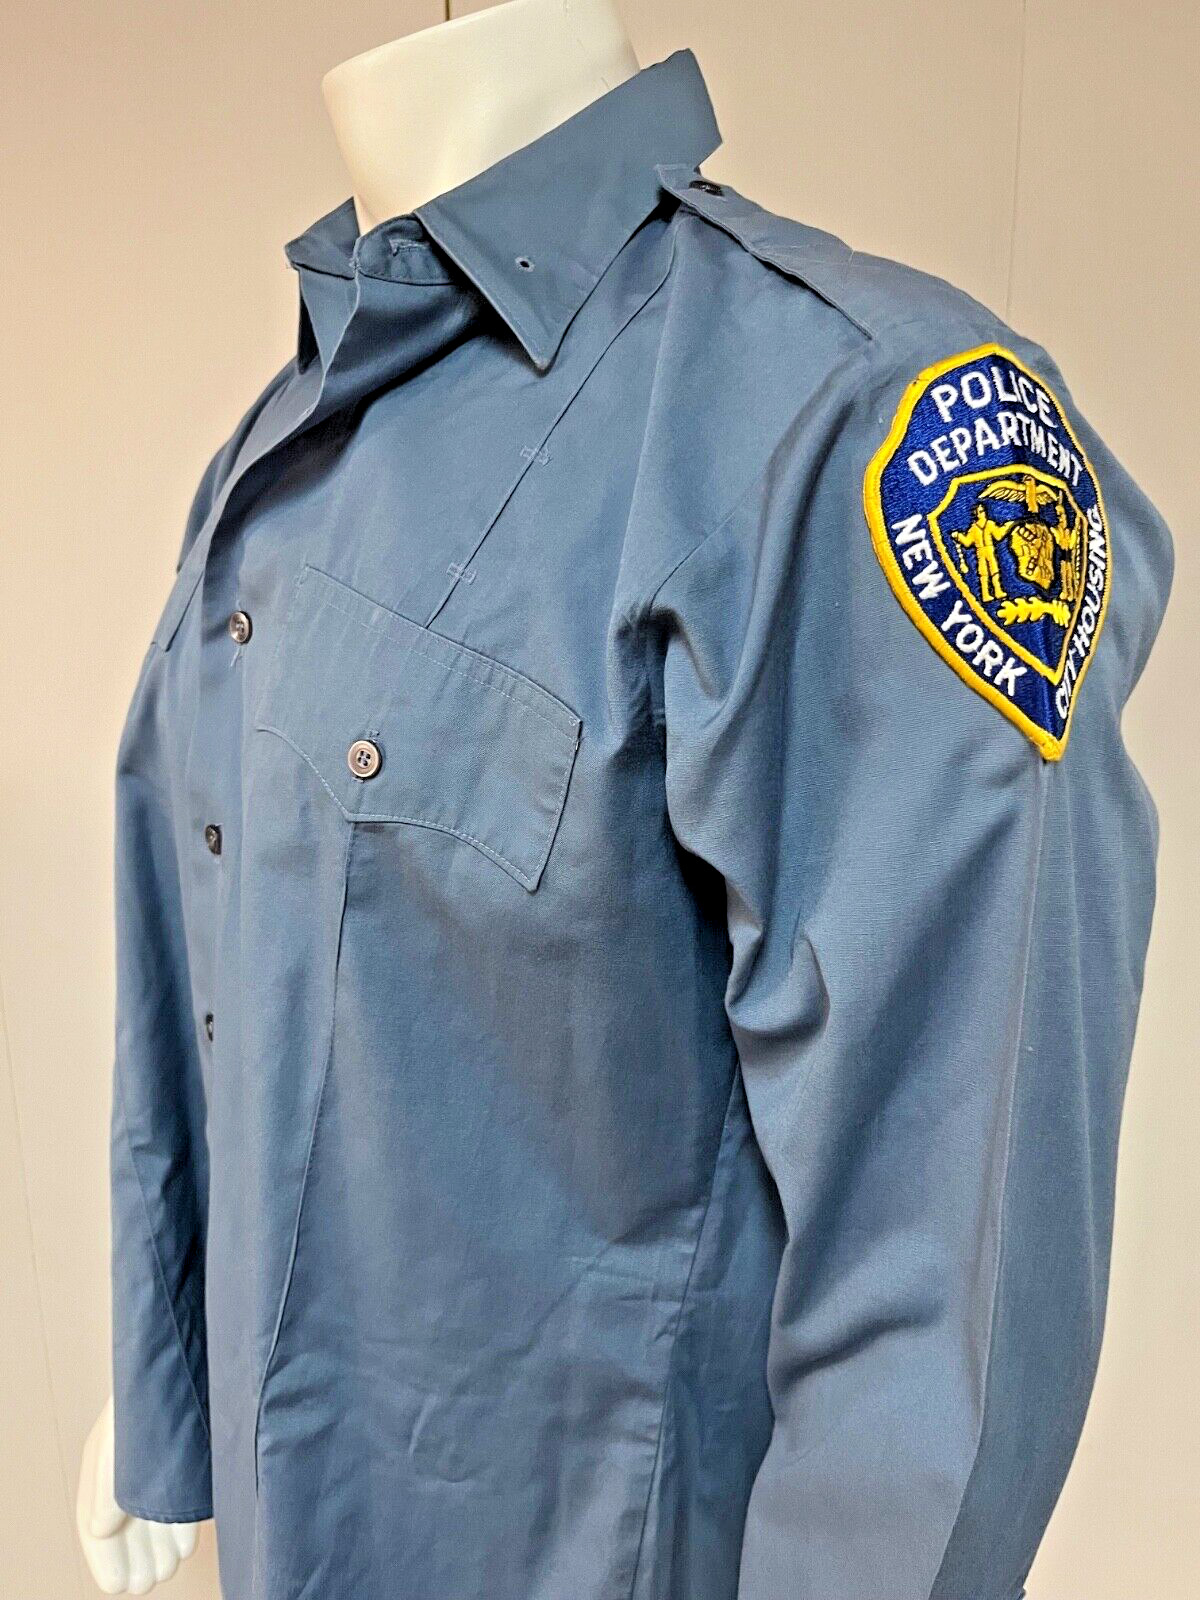 Retired Vintage 1980s NYPD Park Coats Police Uniform L/S Large Cleaned 16x34/35